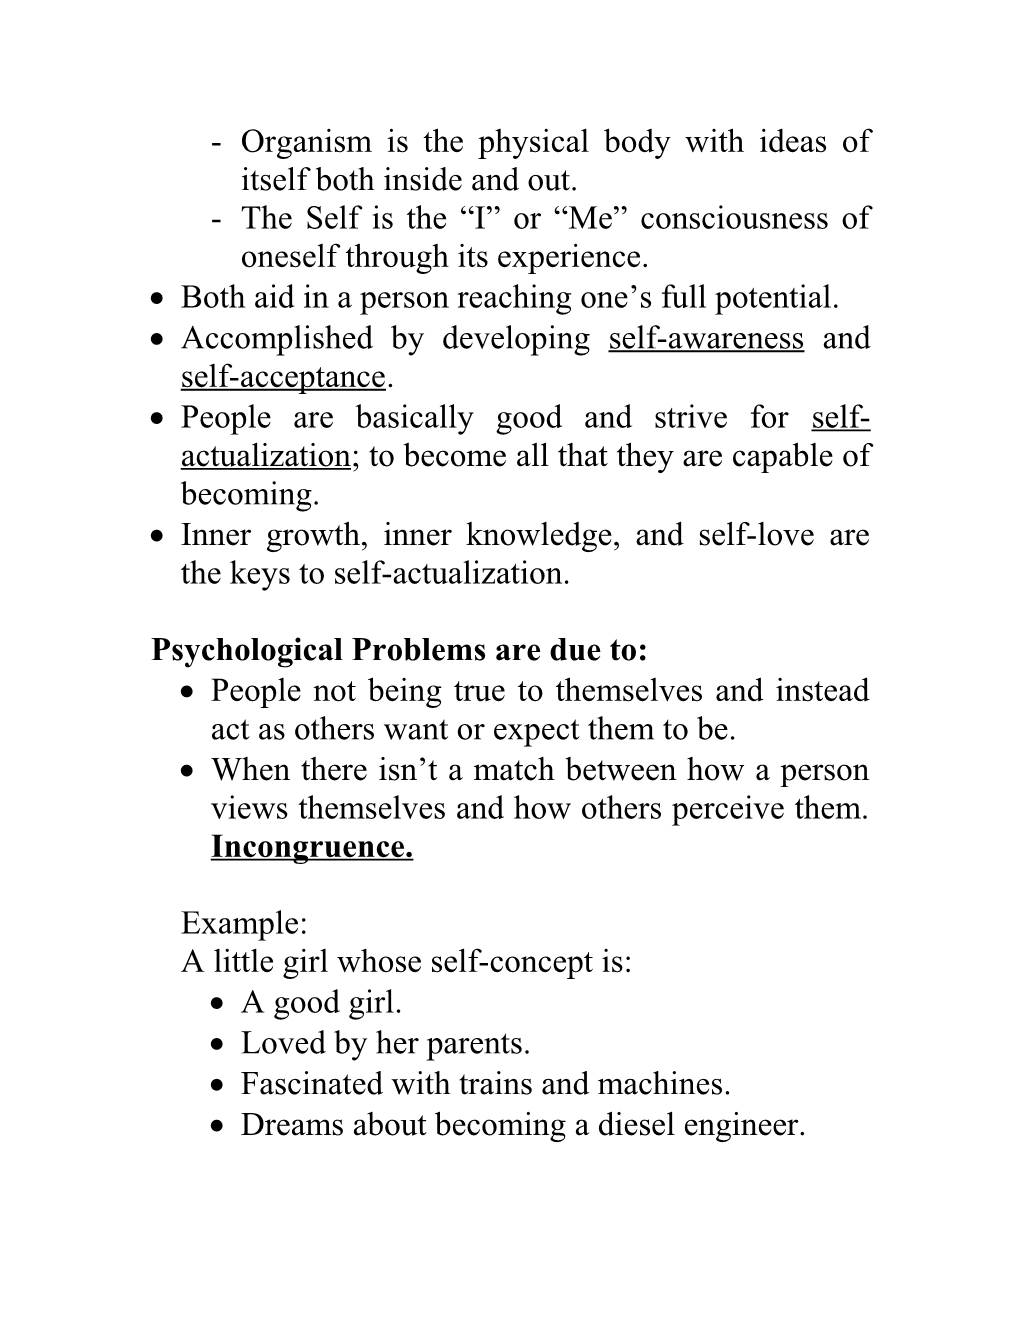 Carl Rogers and the Humanistic Approach to Personality